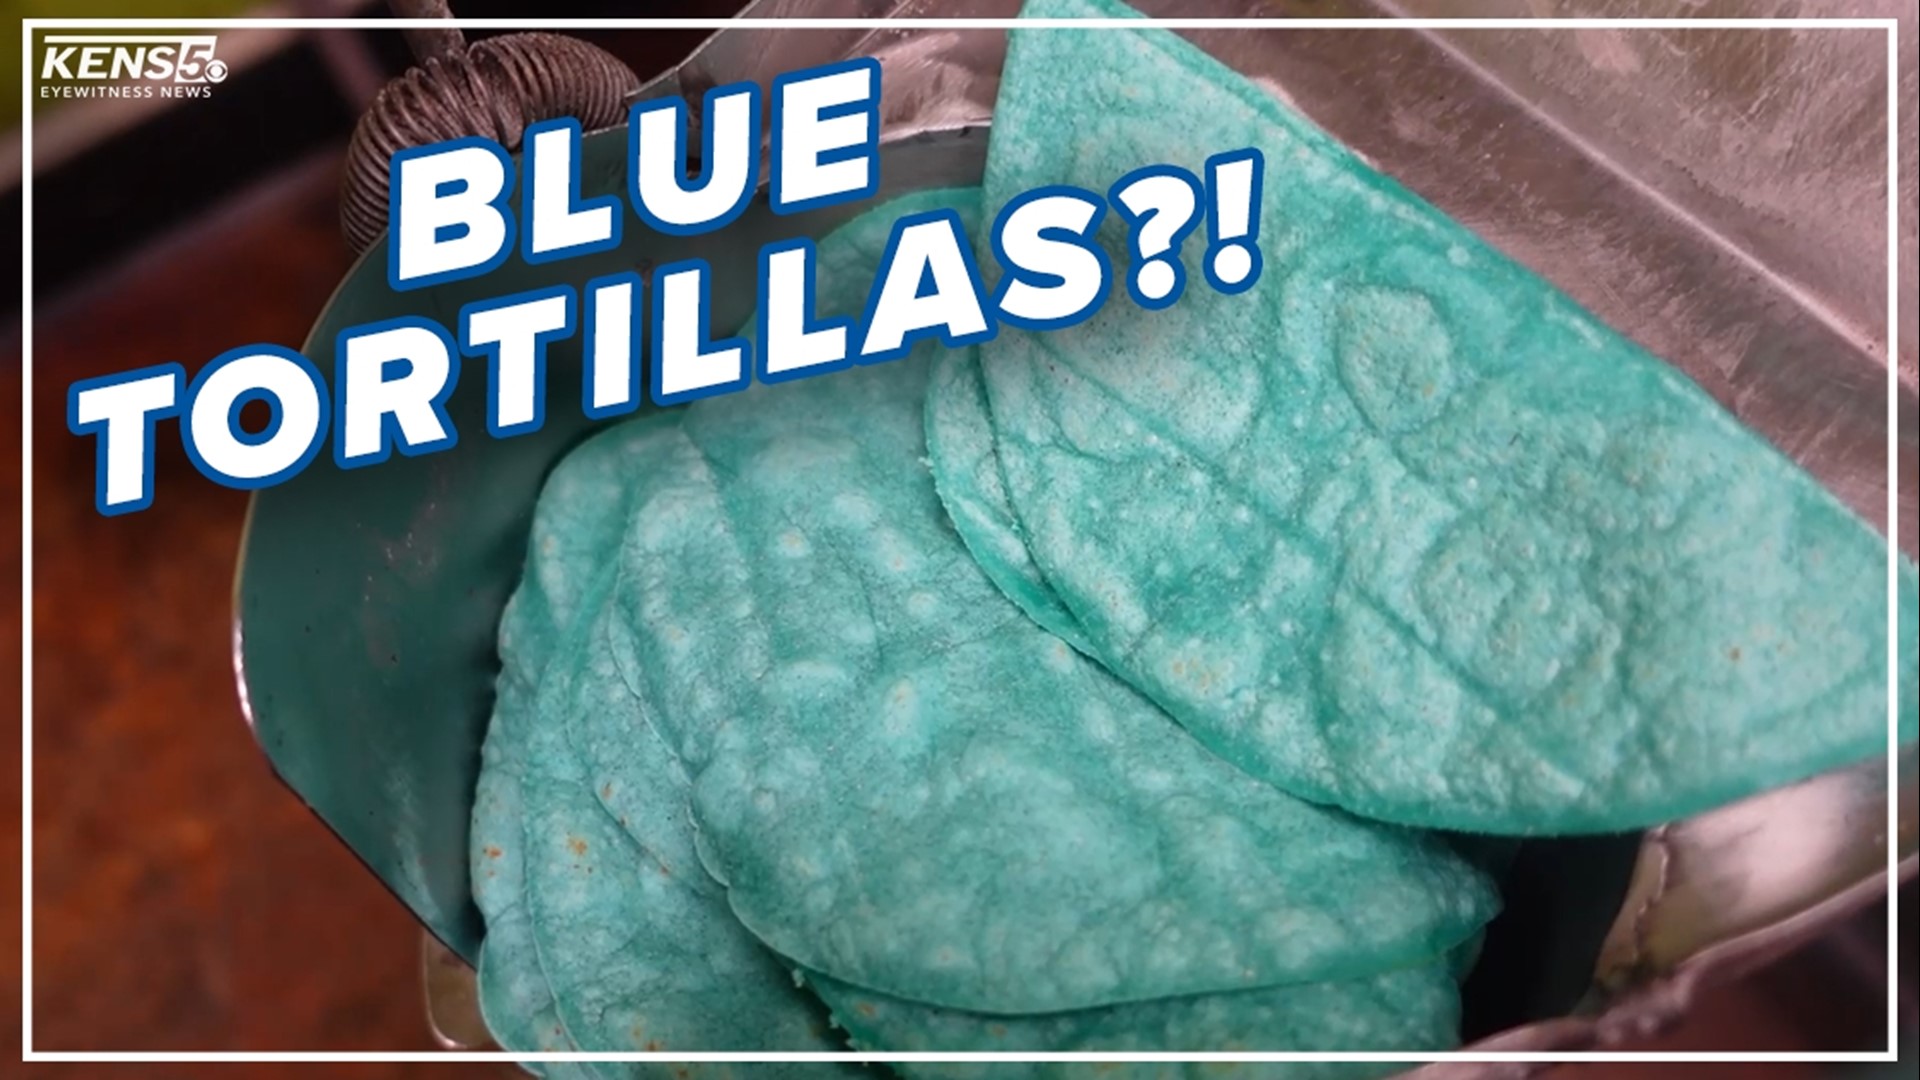 La Milpa is all about tortillas. From corn, wheat and corn with a twist, Lexi Hazlett stepped inside to see how they make them.